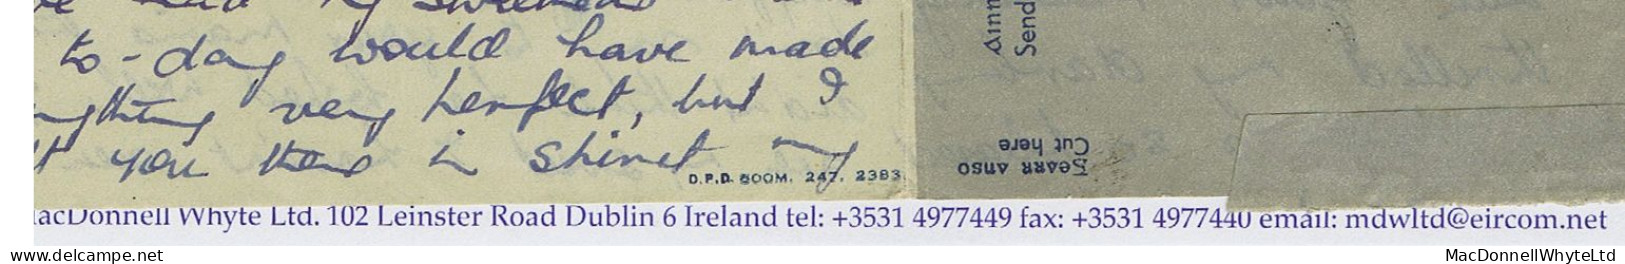 Ireland Airletter 1950 Aerogramme Imprint 247. 2383 Used Dublin To Hong Kong With Angel Victor 6d - Poste Aérienne